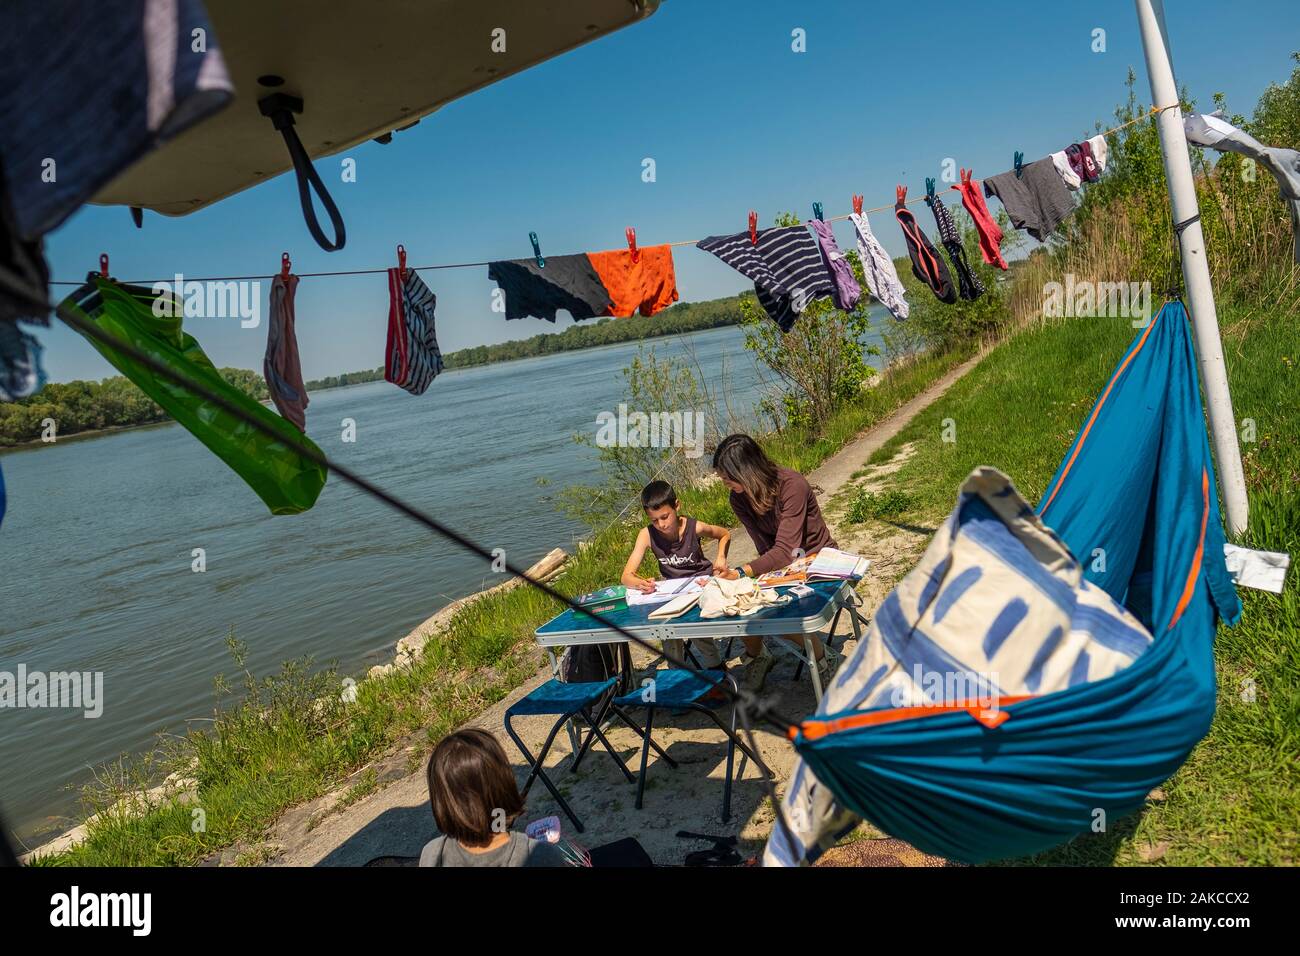 Serbia, Apatin, Northern Banat, clement goes to school in the middle of drying clothes Stock Photo